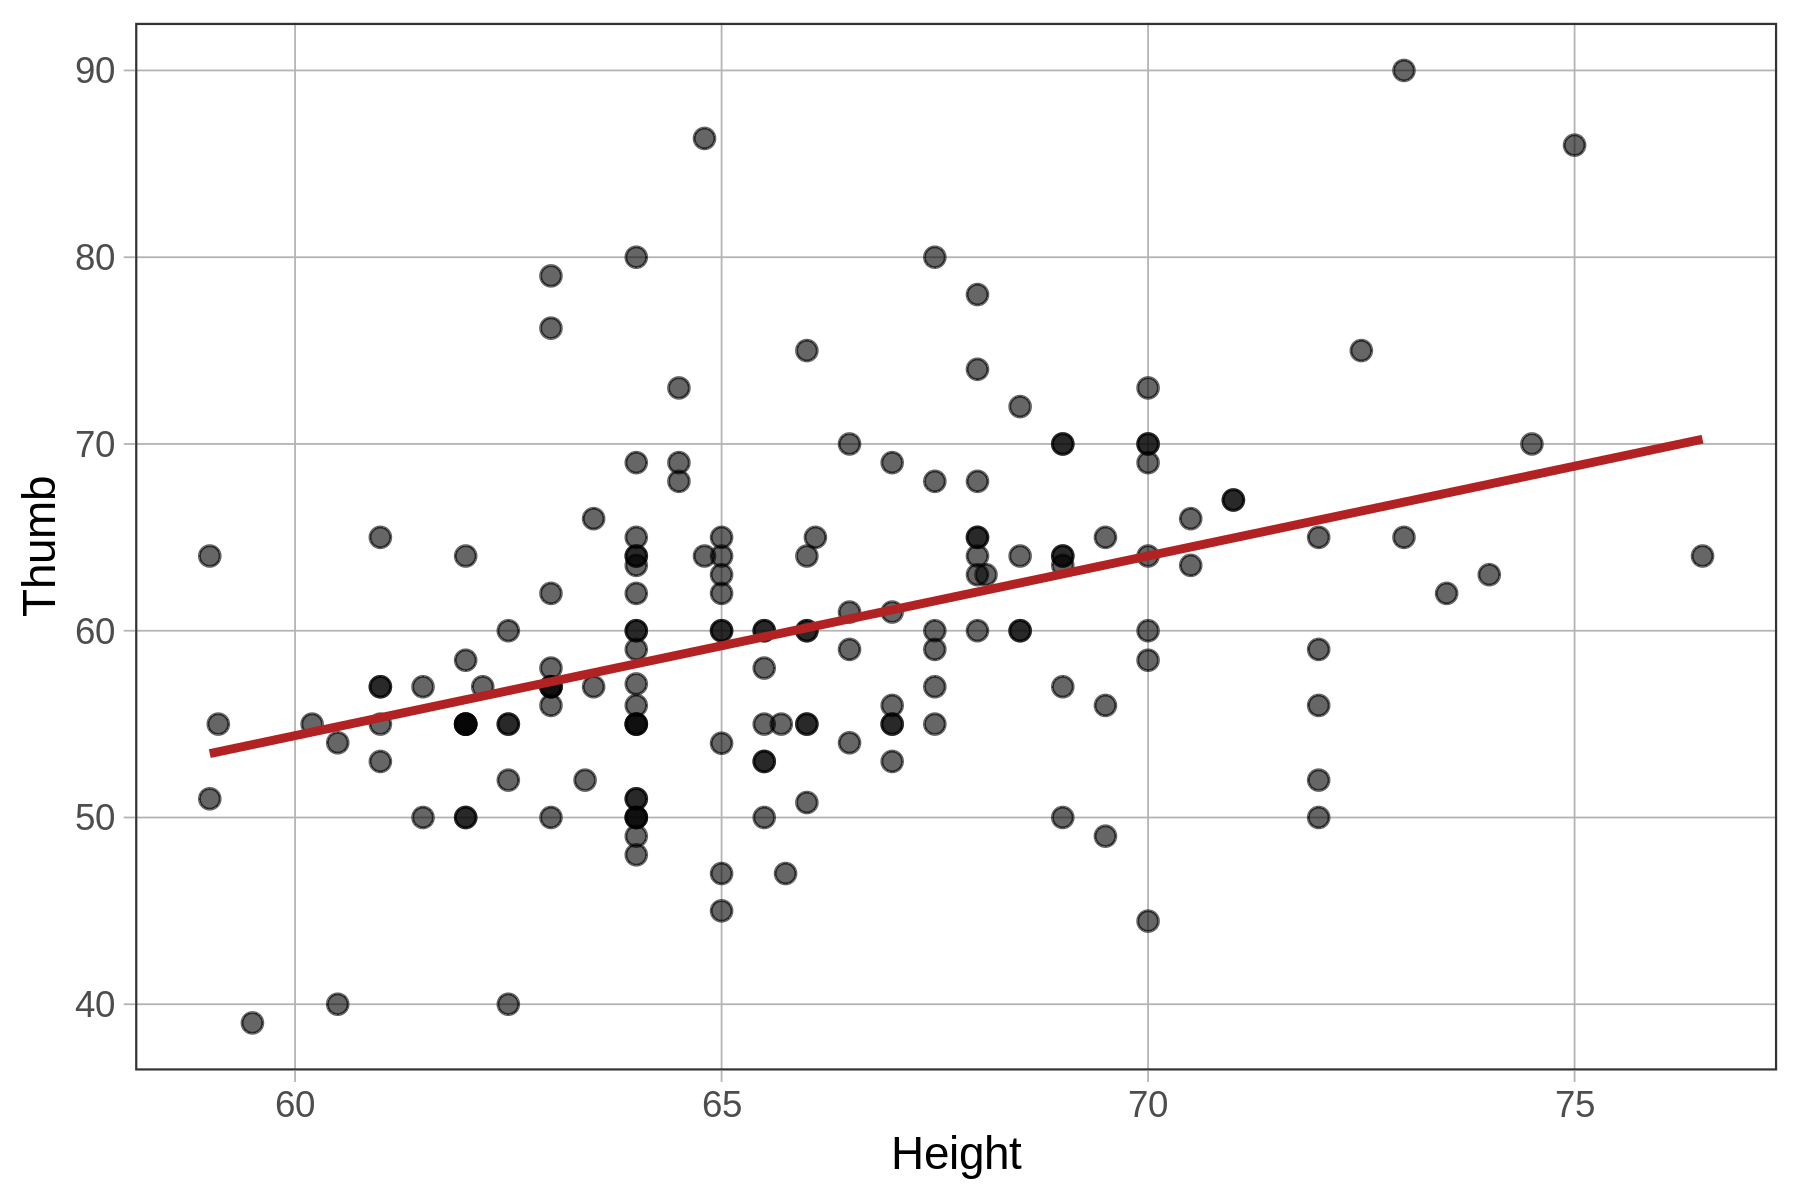 A scatterplot of Thumb by Height with the model predictions in red.